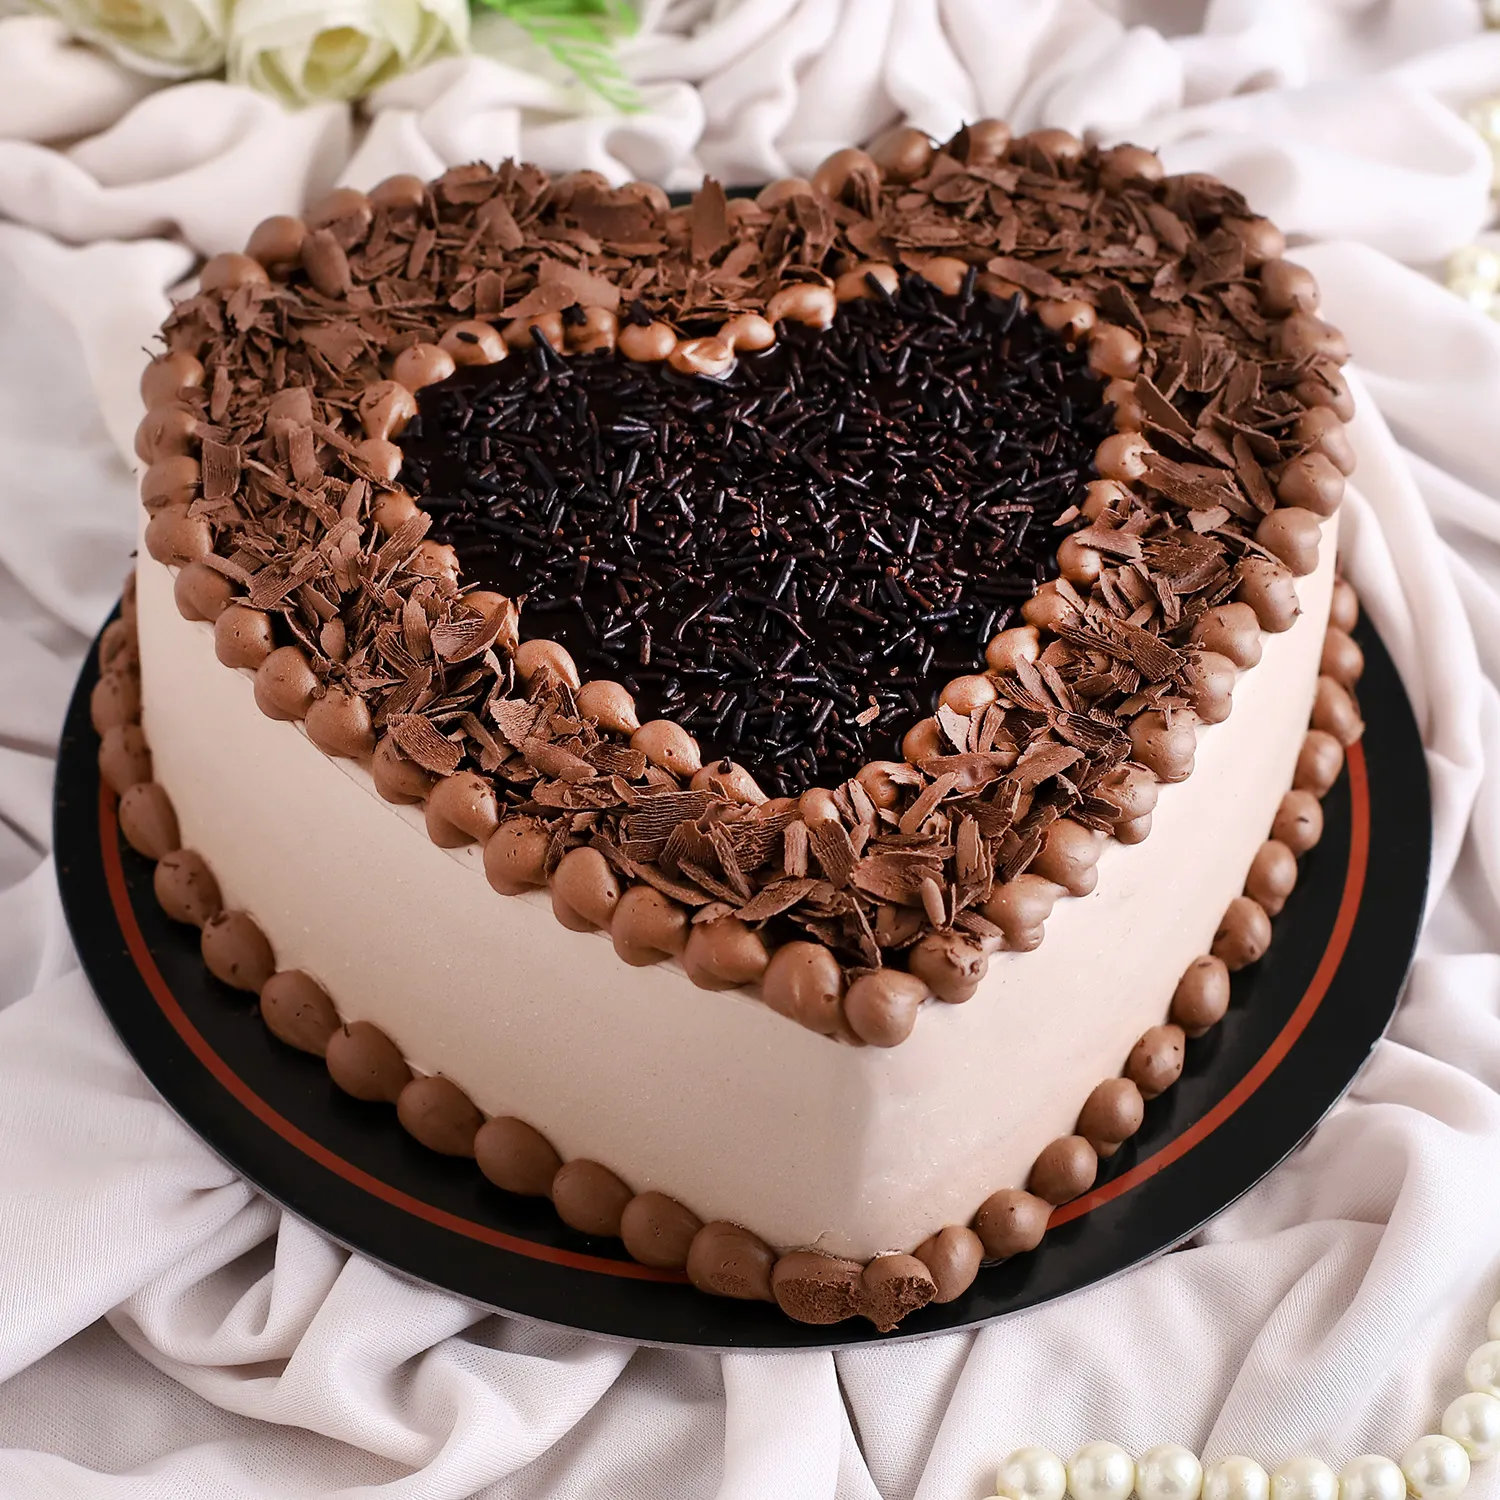 Delicious Heart Shaped Chocolate Cake - 1 KG